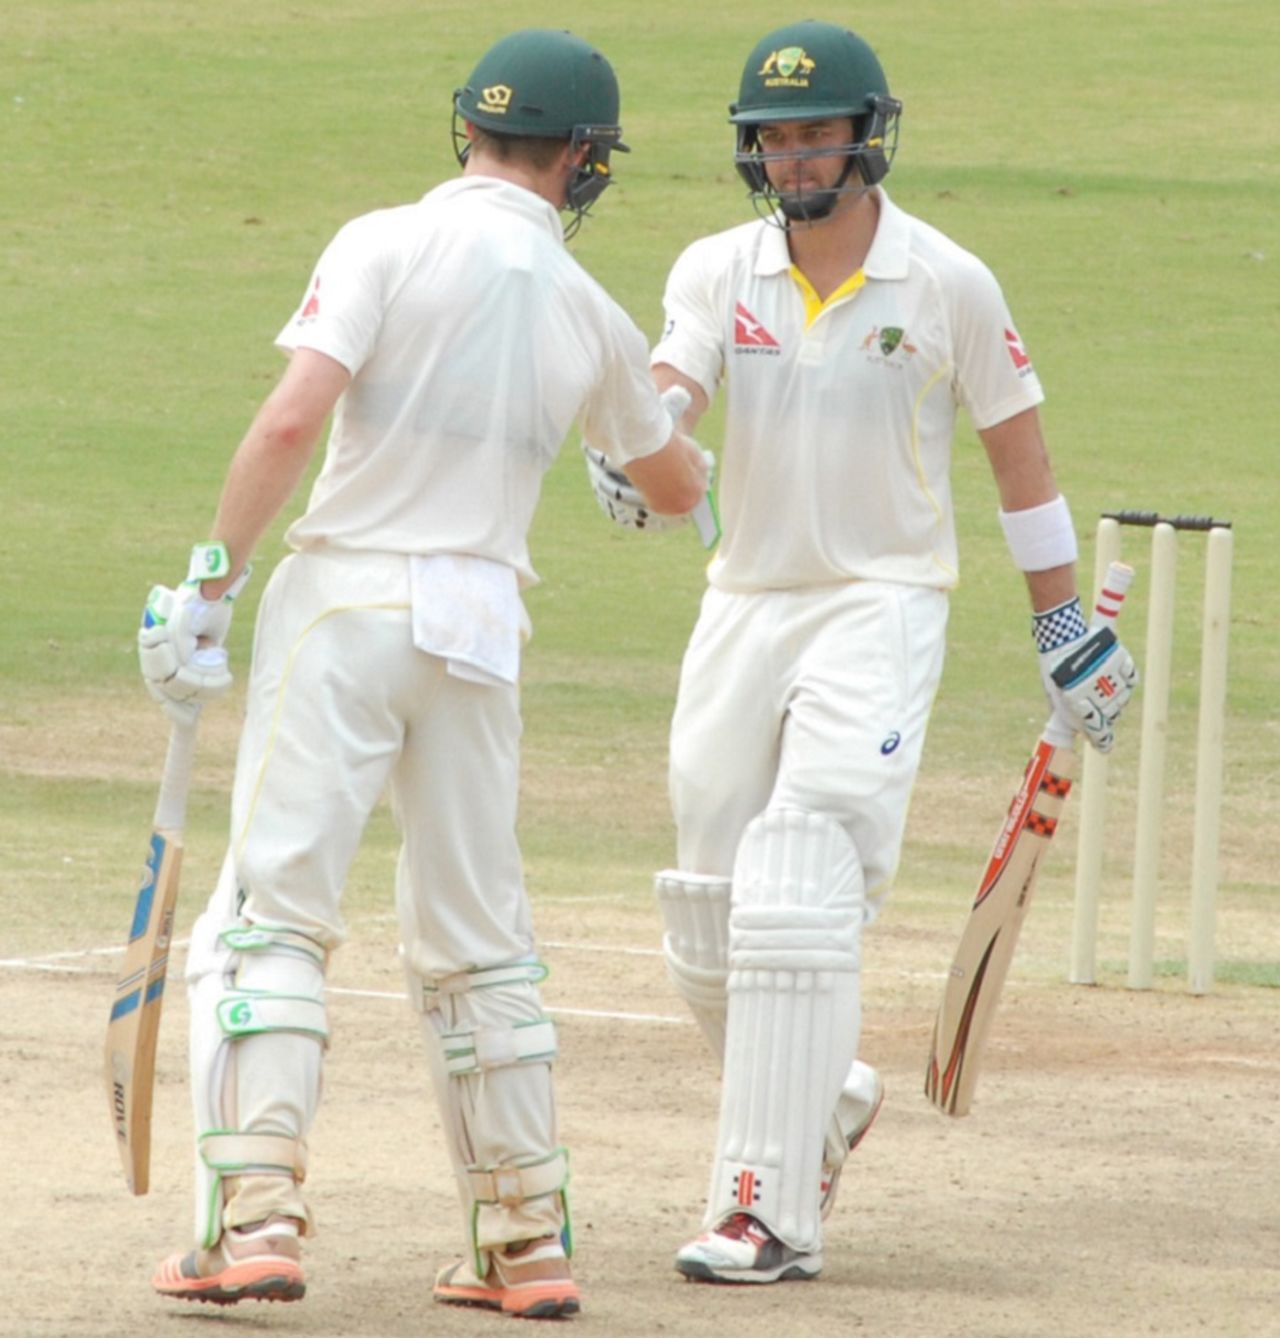 Callum Ferguson is congratulated after he brought up his half-century, India A v Australia A, 2nd unofficial Test, Chennai, 2nd day, July 30, 2015